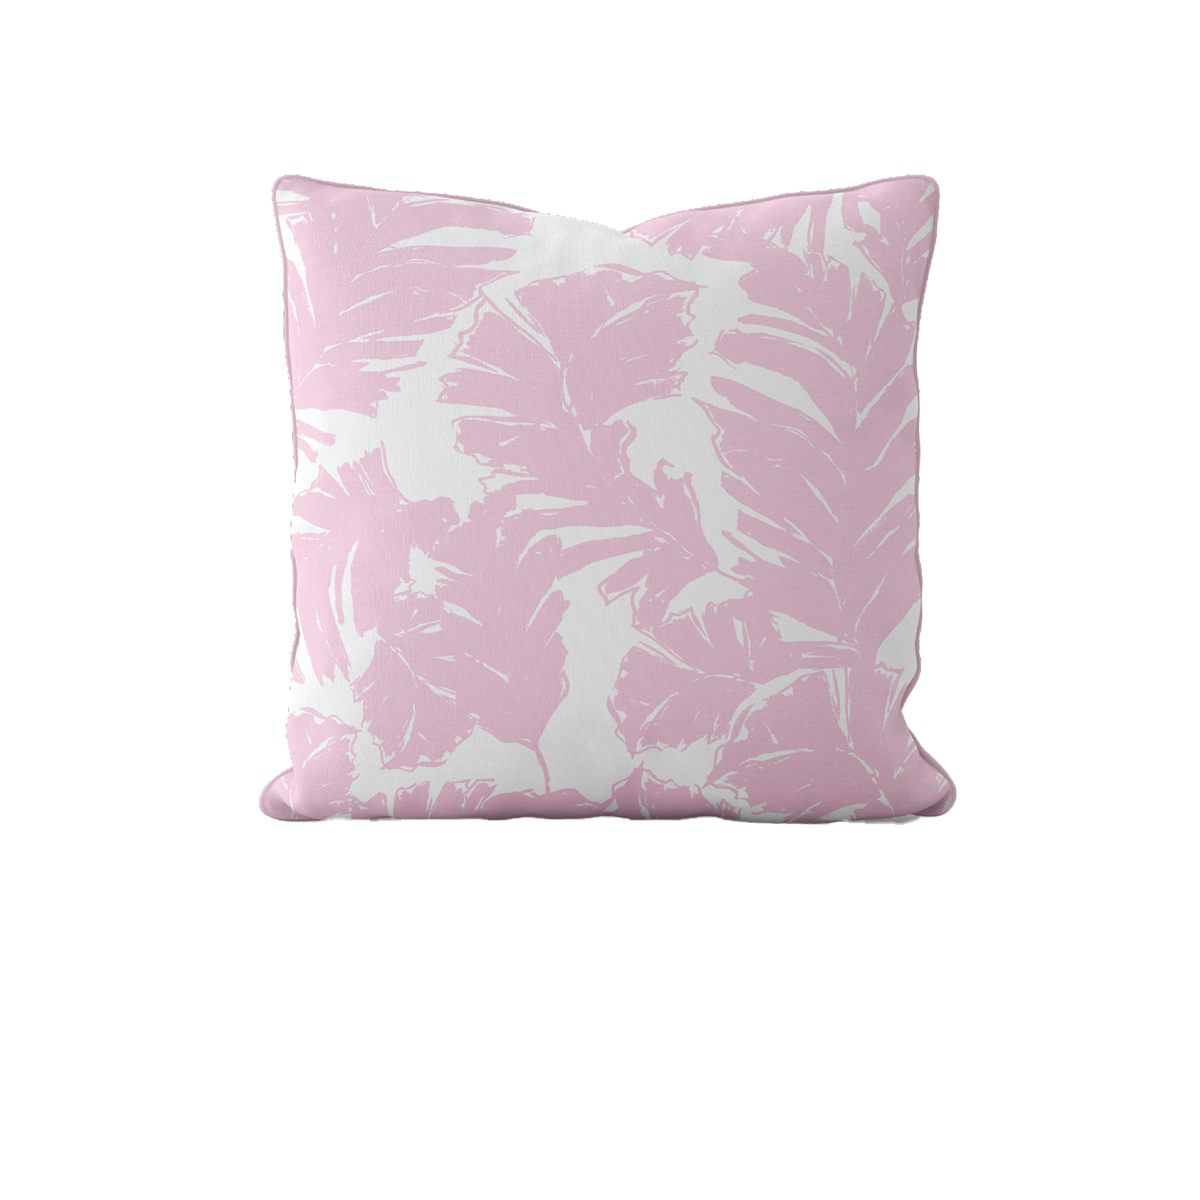 WHOLESALE: Sundrenched Silhouettes Pillow Covers Bulk